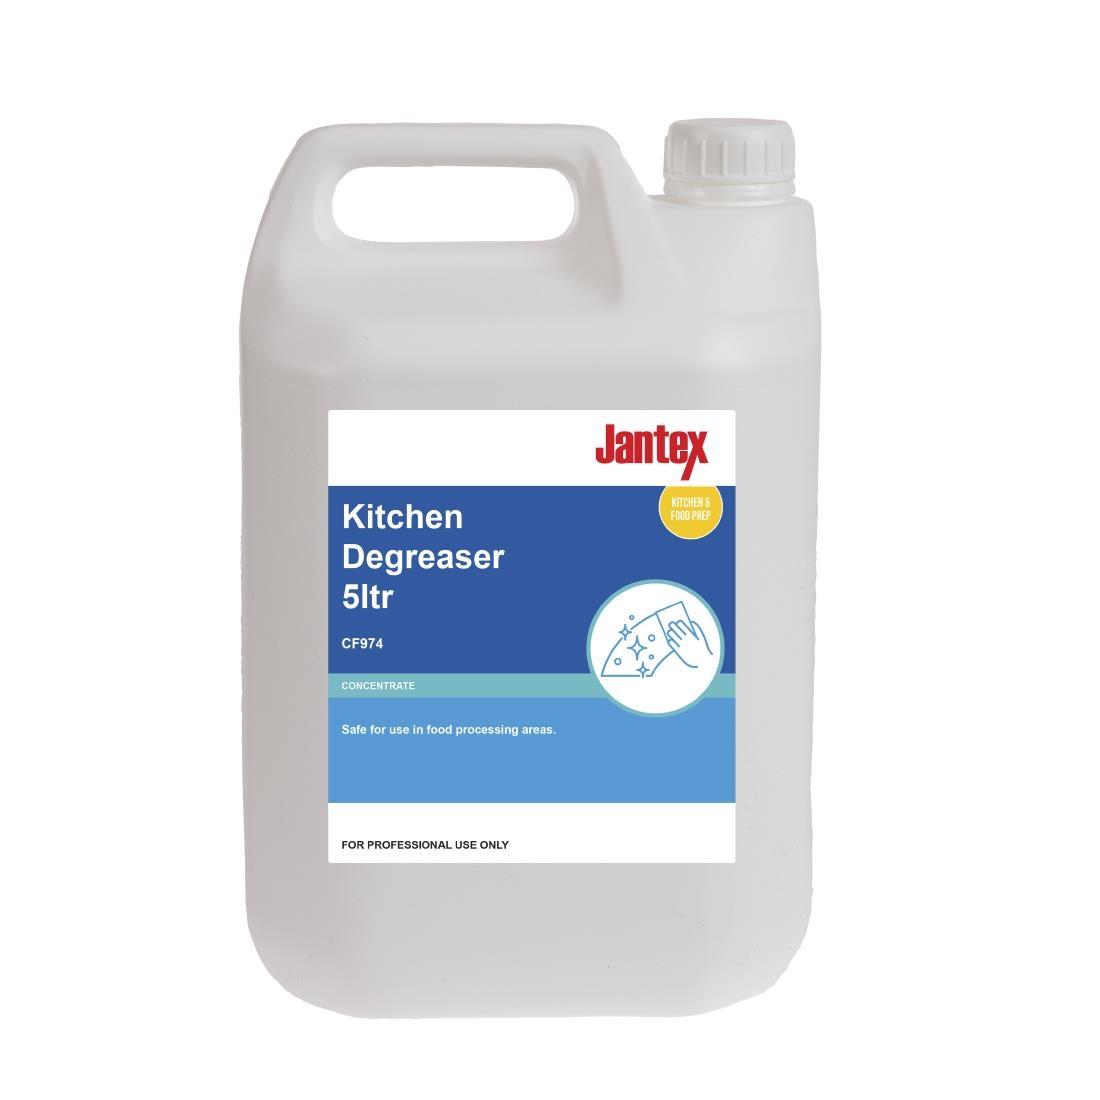 Jantex Kitchen Degreaser Concentrate 5Ltr - CF974  - 1